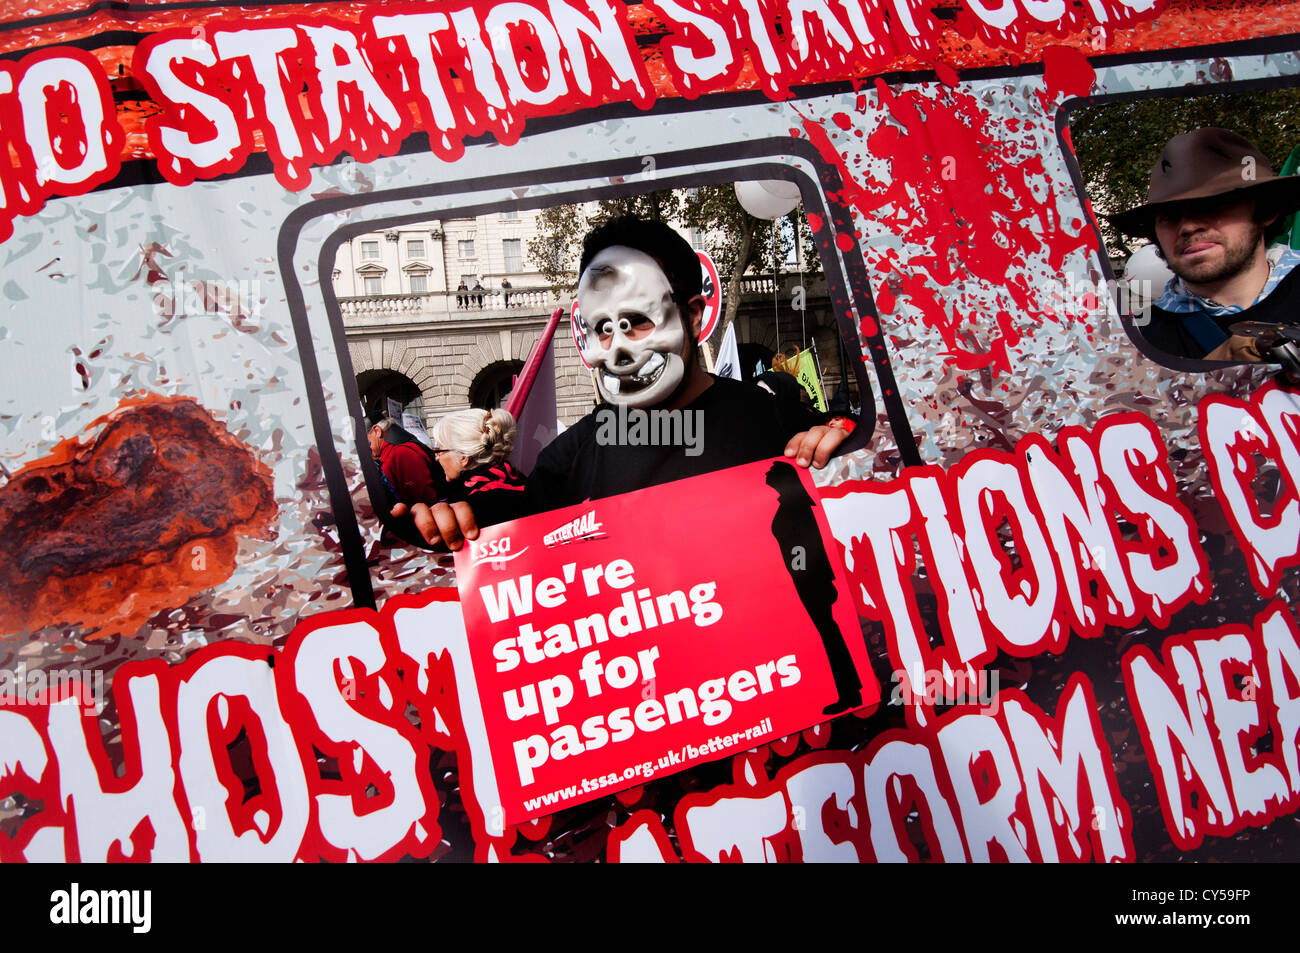 Anti-austerity and anti cuts  protest organized by the TUC  marched through through Central London Oct 2012 Stock Photo